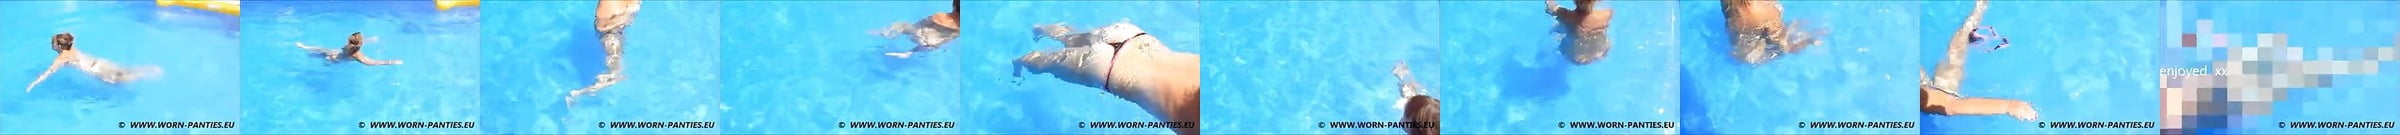 Swimming Pool Porn Videos New Page 6